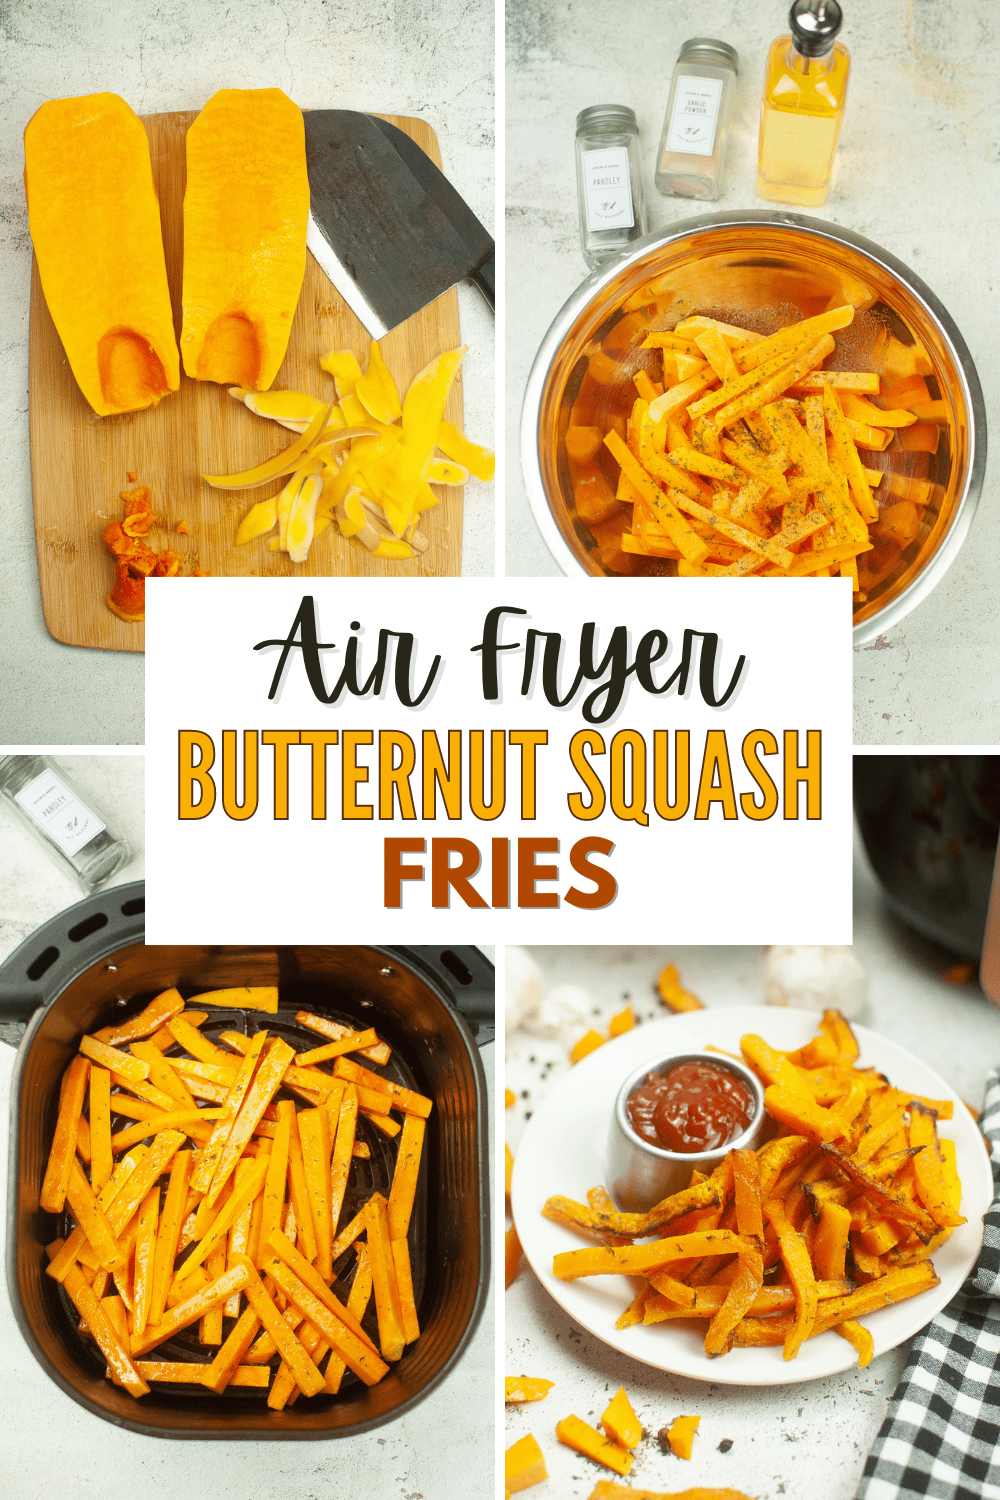 These air fryer butternut squash fries are a healthy and delicious alternative to traditional fried potatoes. They're a perfect side dish. #airfryerbutternutsquashfries #airfryer #butternutsquash #fries #butternutsquashfries via @wondermomwannab